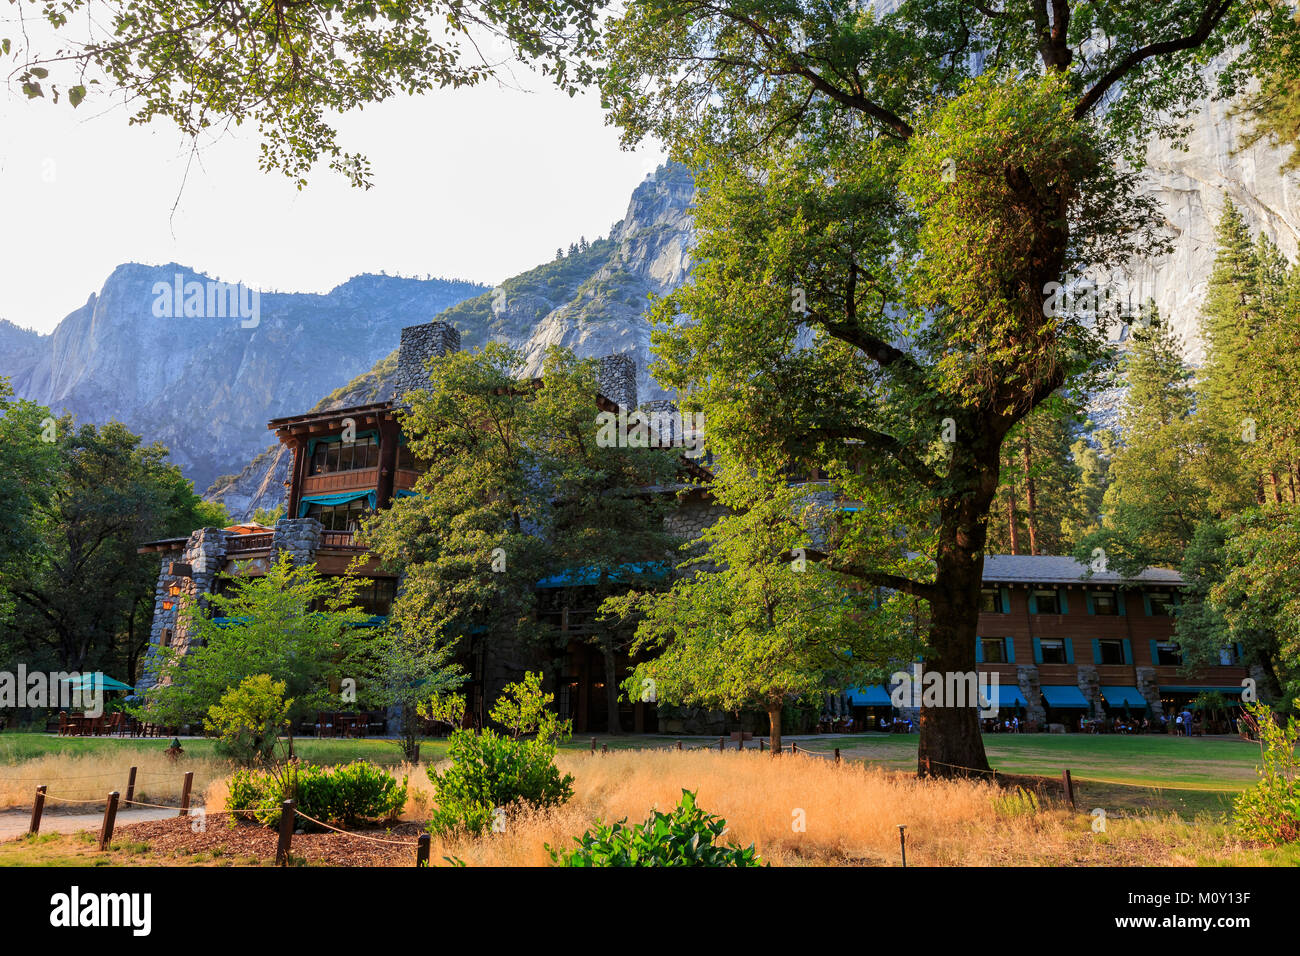 Afternoon view of the famous historical Ahwahnee hotel in Yosemite National Park, California Stock Photo